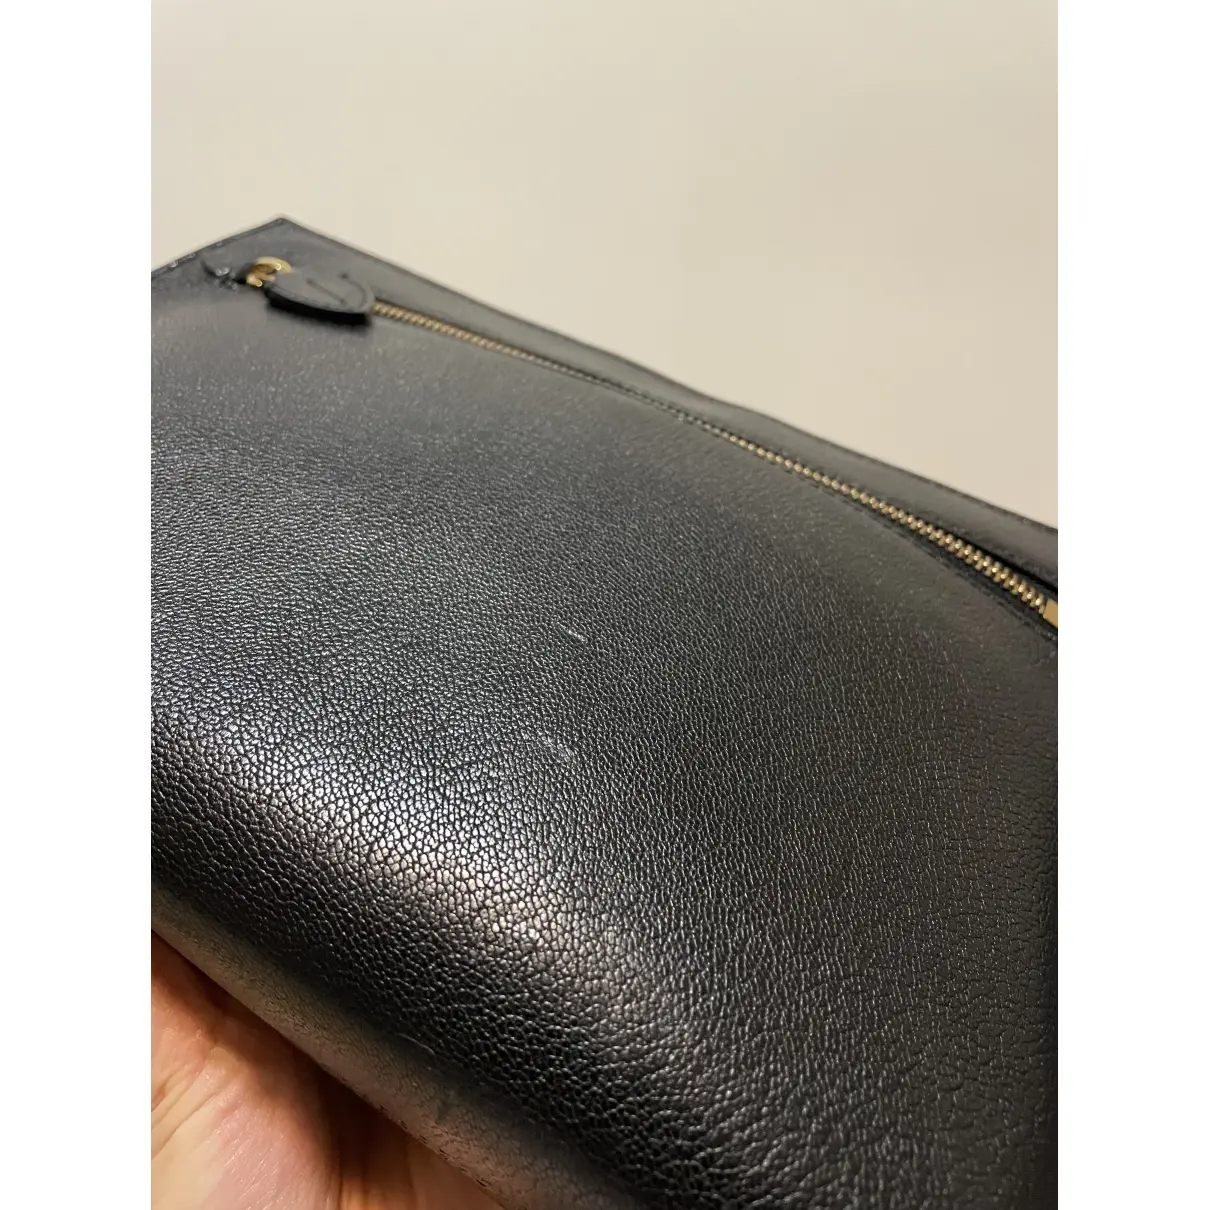 Leather clutch bag Burberry